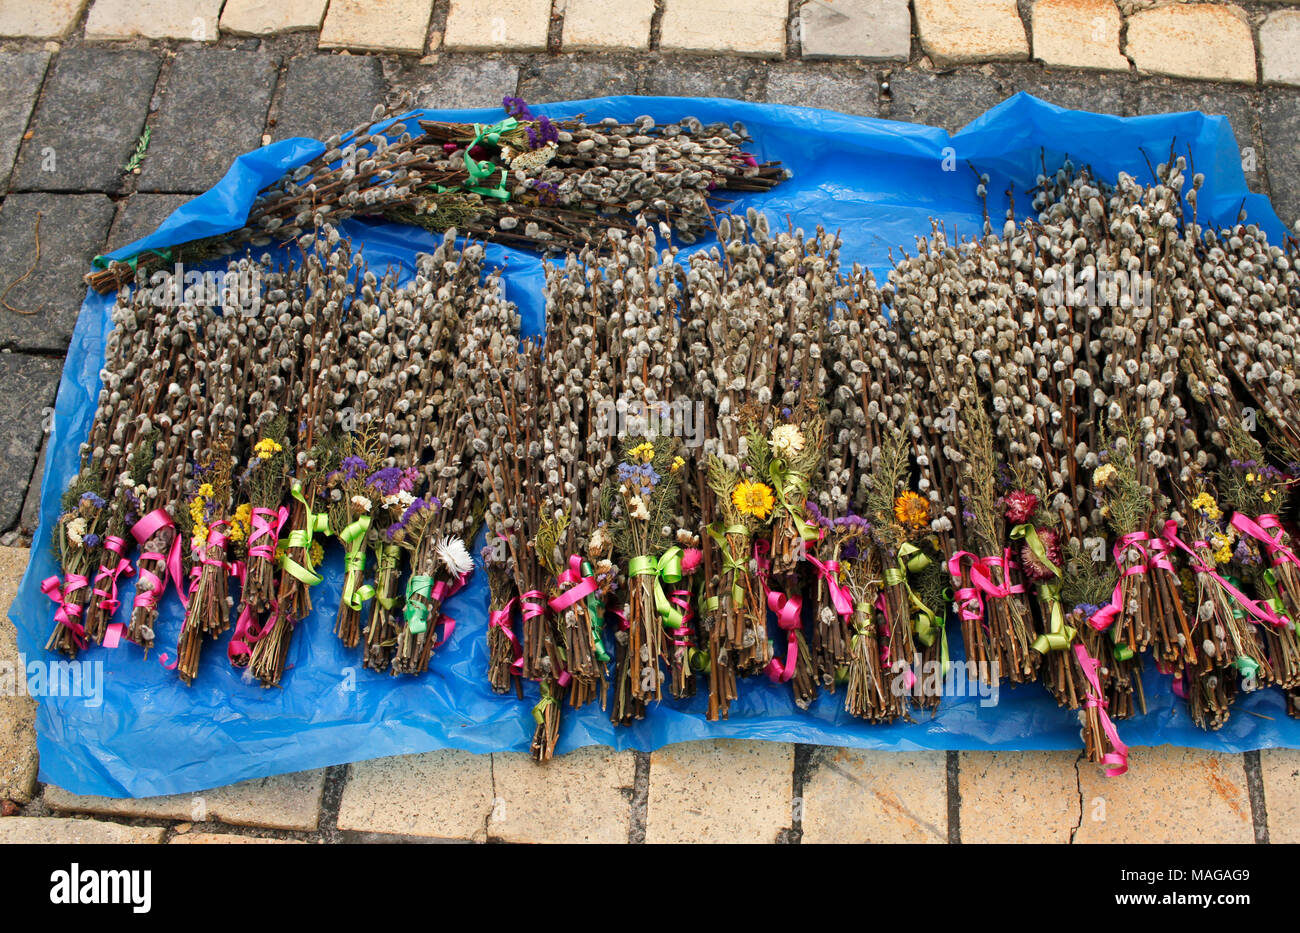 Kiev, Ukraine. 1 st Apr, 2018. Decorated branches of pussy willow for sale in front of the St. Michael´s golden-domed monastery in Kiev, Ukraine. Credit: Jukka Palm/Alamy Live News. Credit: Jukka Palm/Alamy Live News Stock Photo